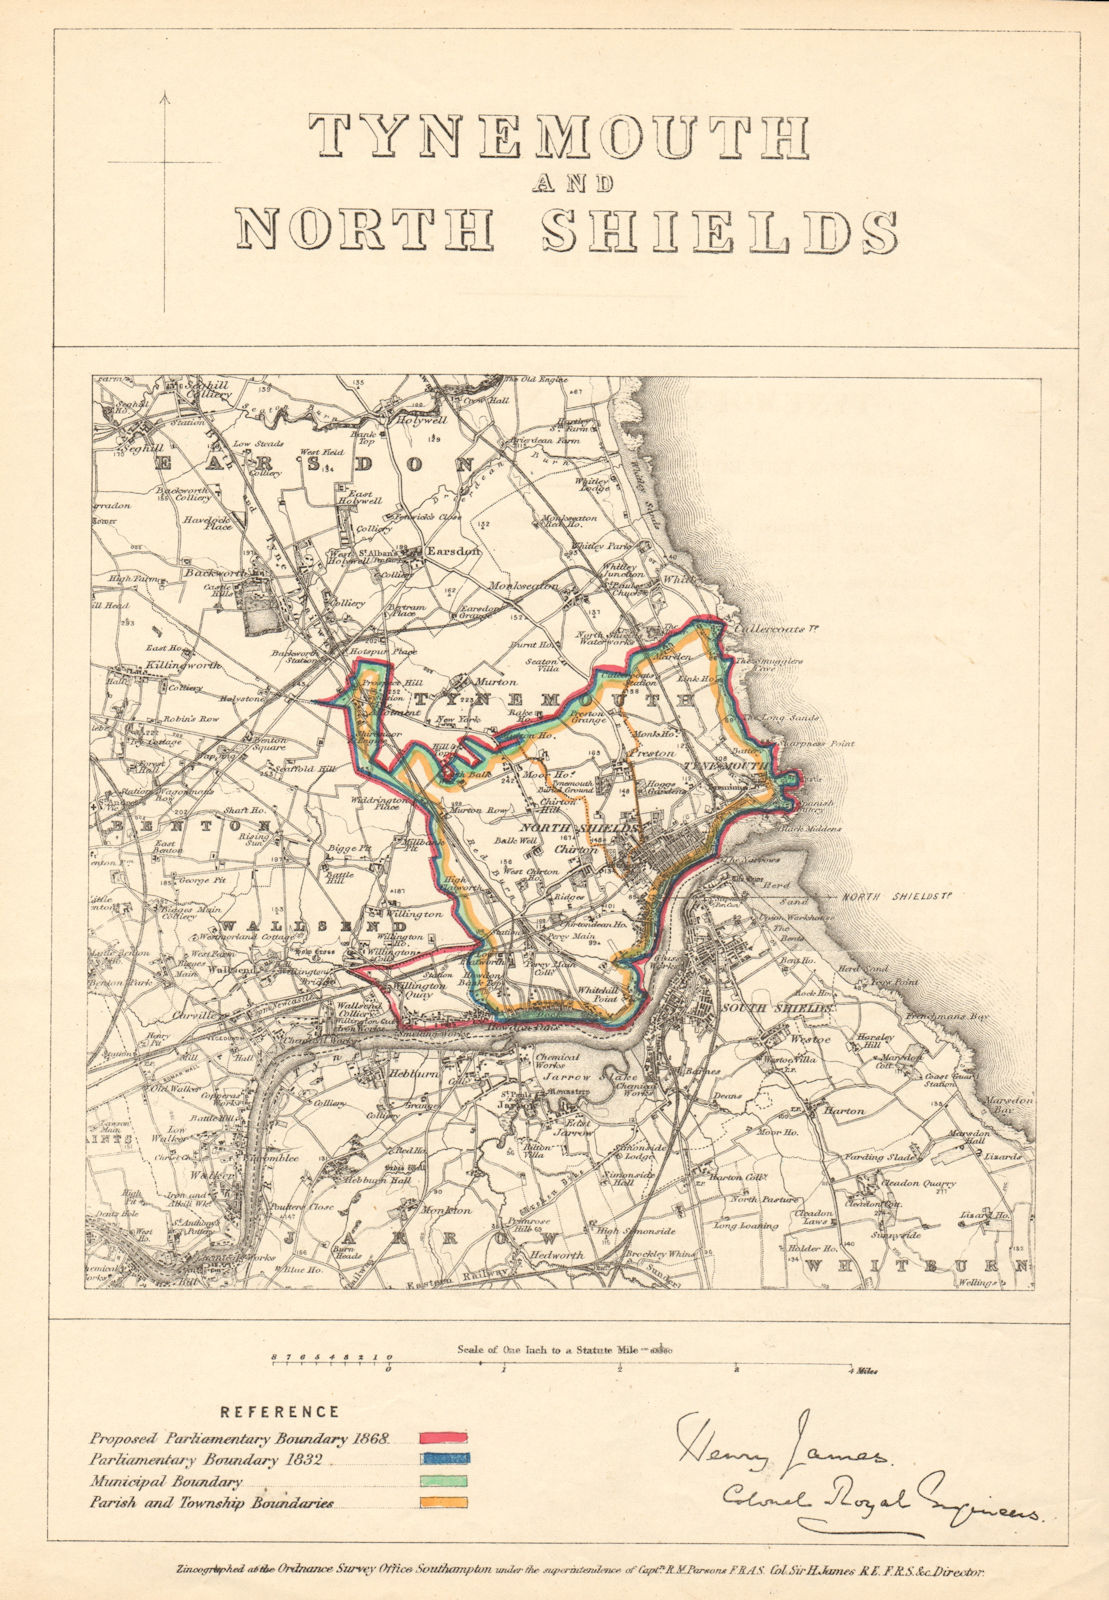 Associate Product Tynemouth and North Shields. JAMES. PARLIAMENTARY BOUNDARY COMMISSION 1868 map